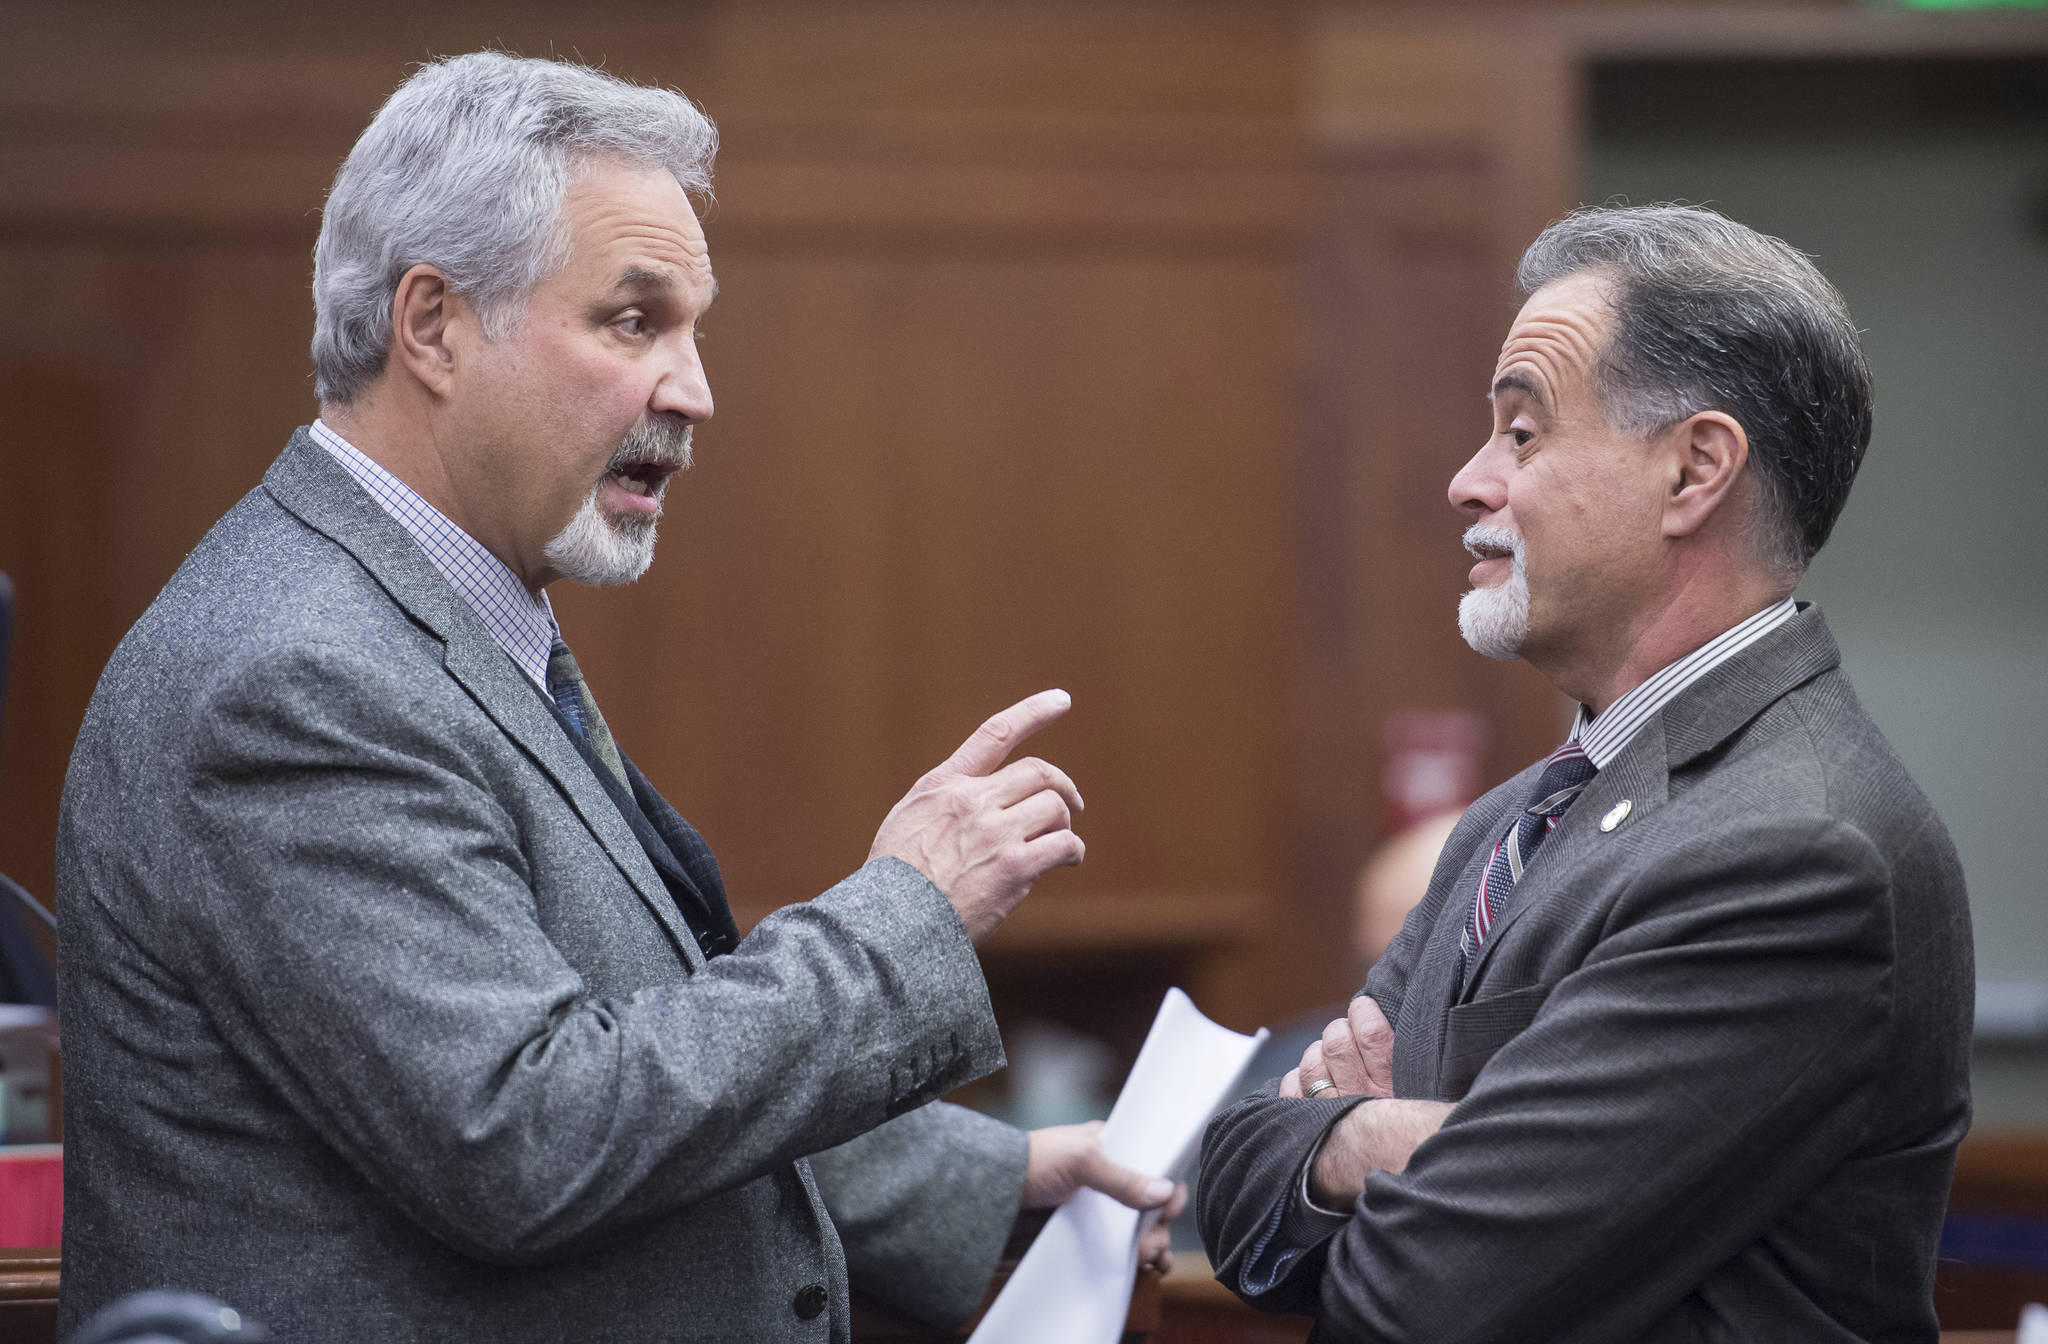 Senate President Pete Kelly, R-Fairbanks, left, and Senate Majority Leader Peter Micciche, R-Soldotna, speak before gaveling in on the first day of the fourth Special Session of the 30th Alaska Legisture on Monday, Oct. 23, 2017. (Michael Penn | Juneau Empire)